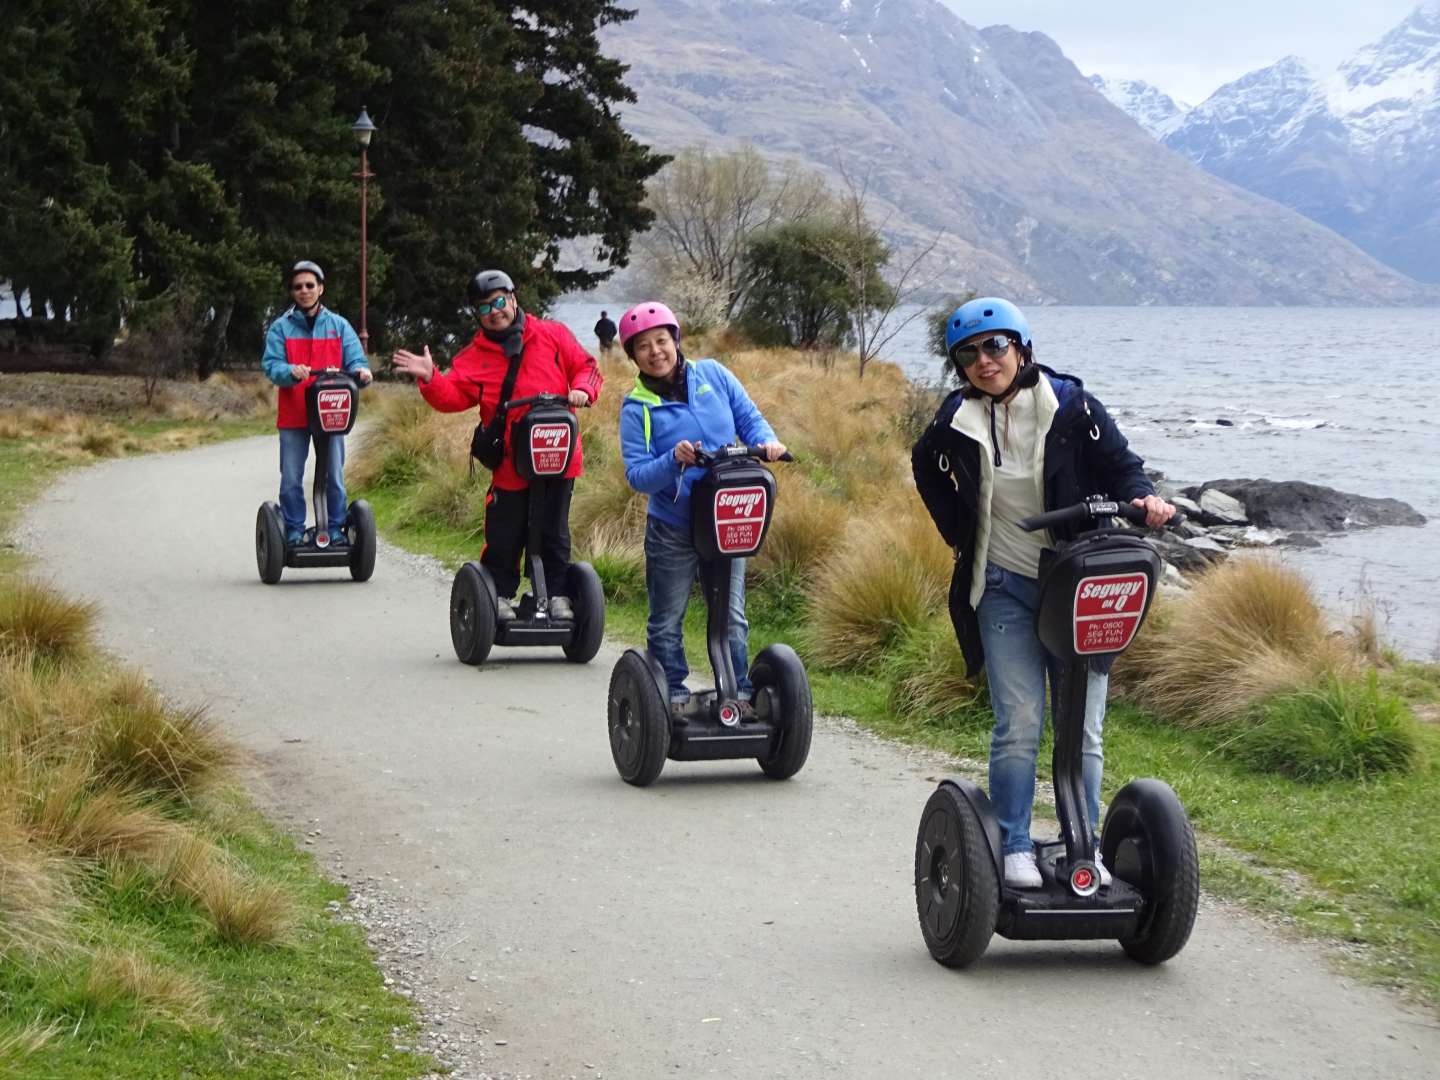 Queenstown Gardens Riding an eco-friendly Segway